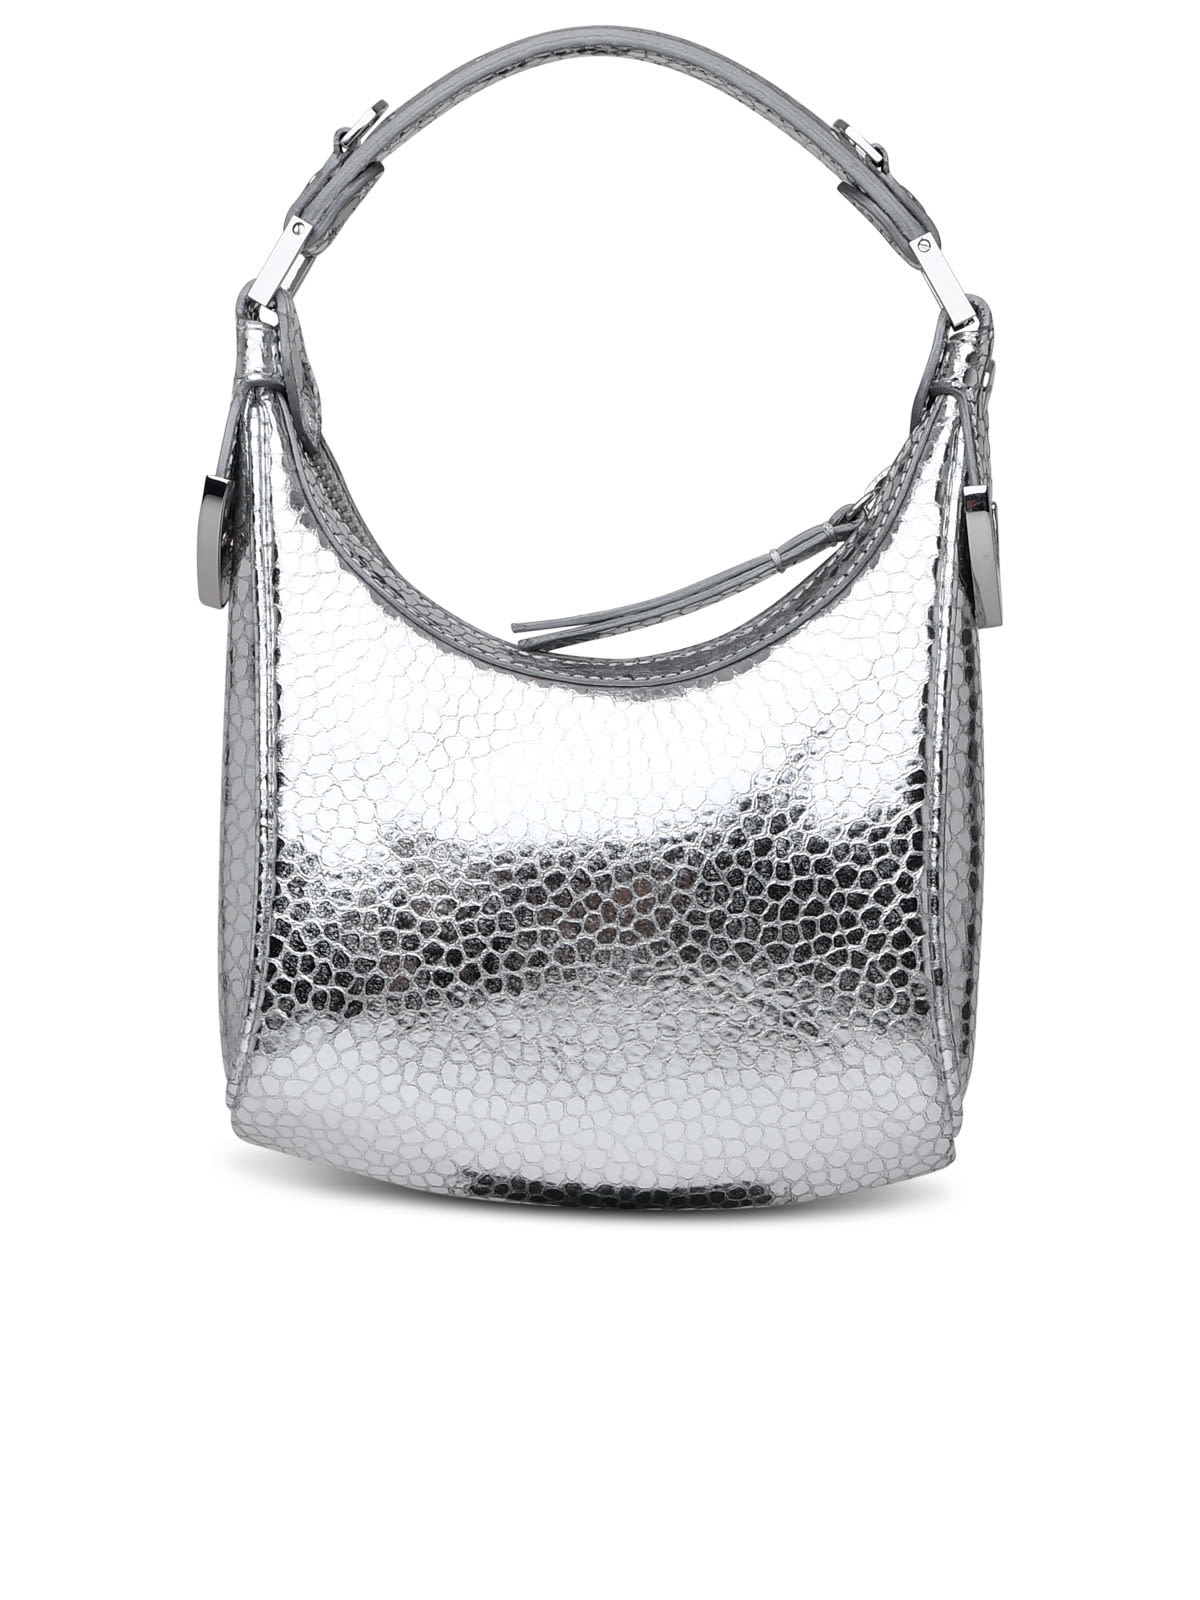 BY FAR COSMO SILVER LEATHER BAG